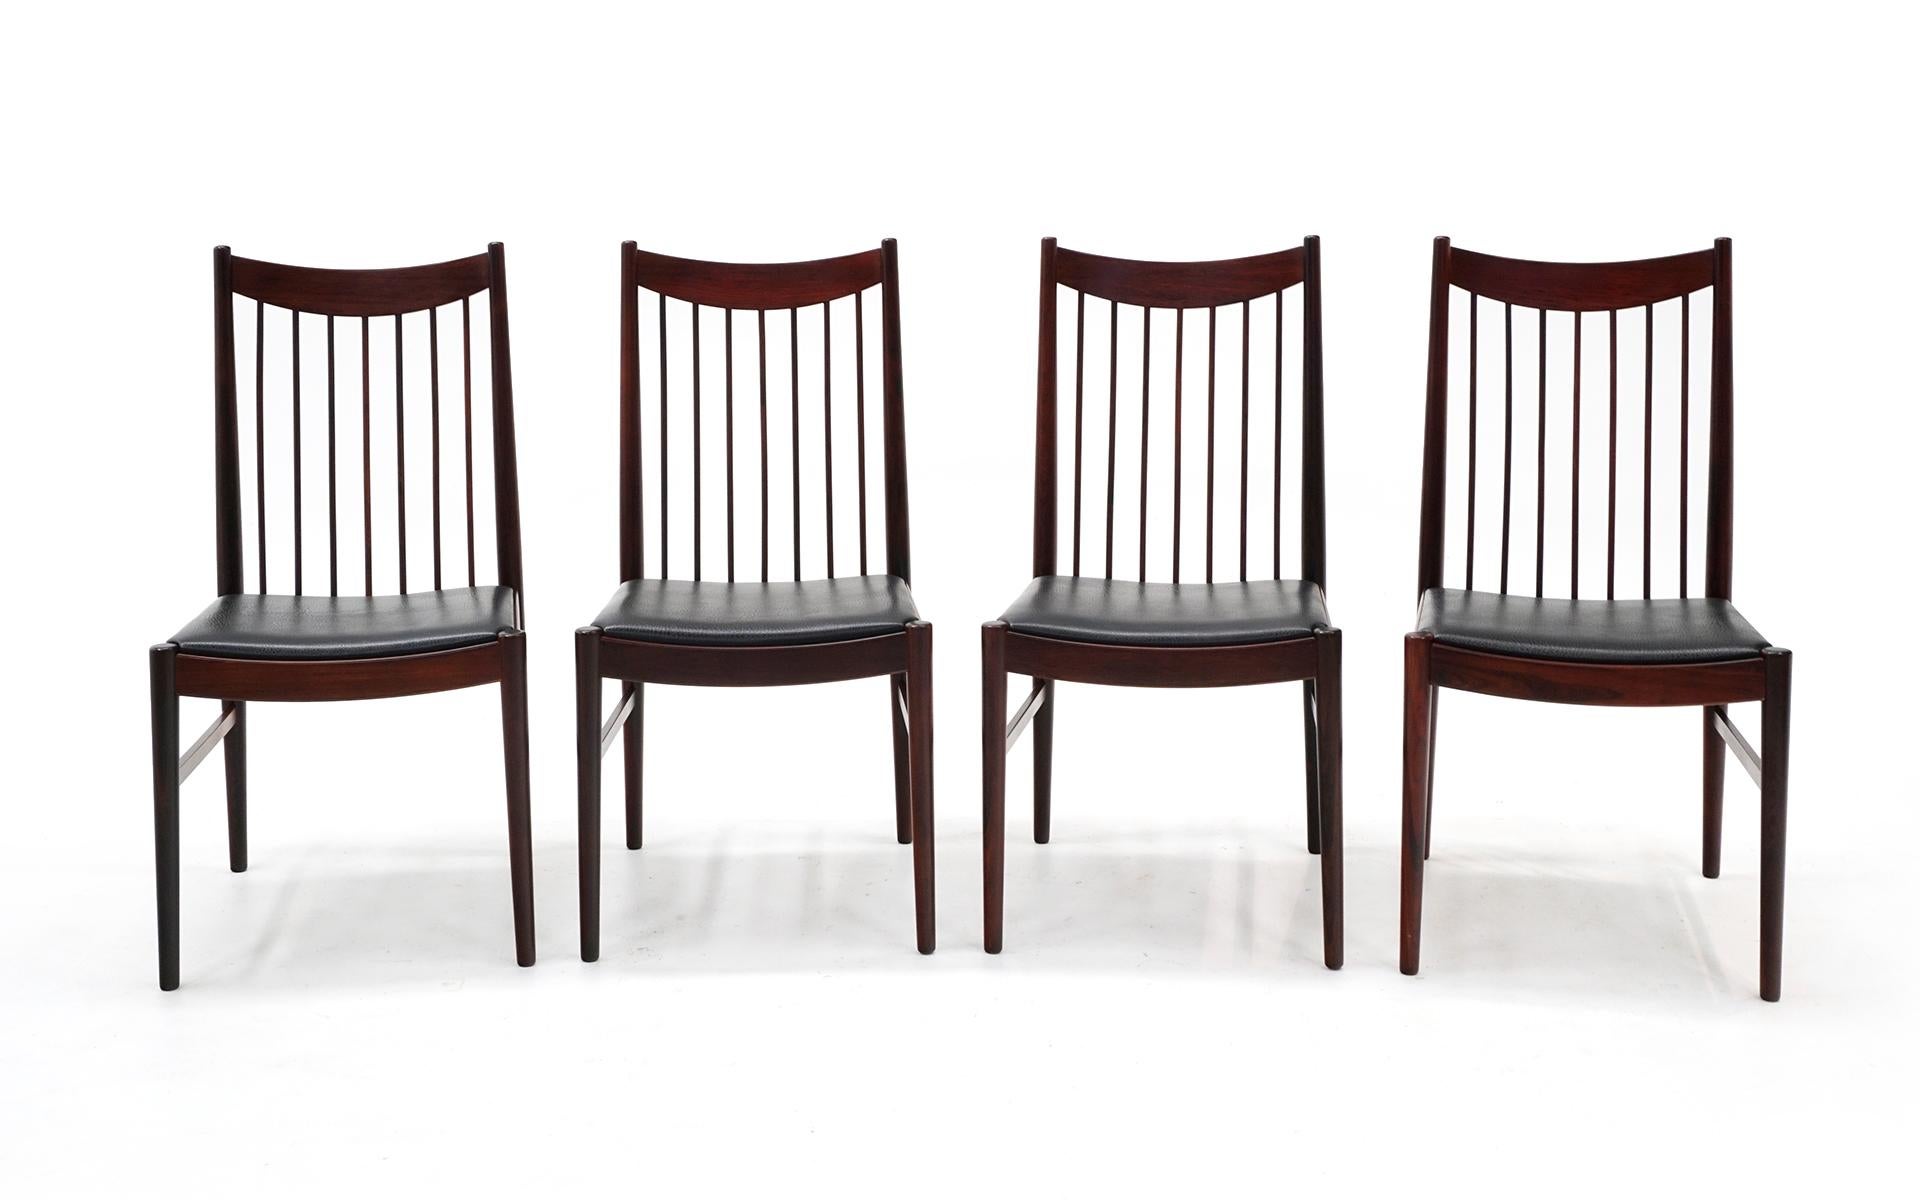 Mid-20th Century Set of Six Rosewood Dining Chairs by Arne Vodder for Sibast, Black Seats